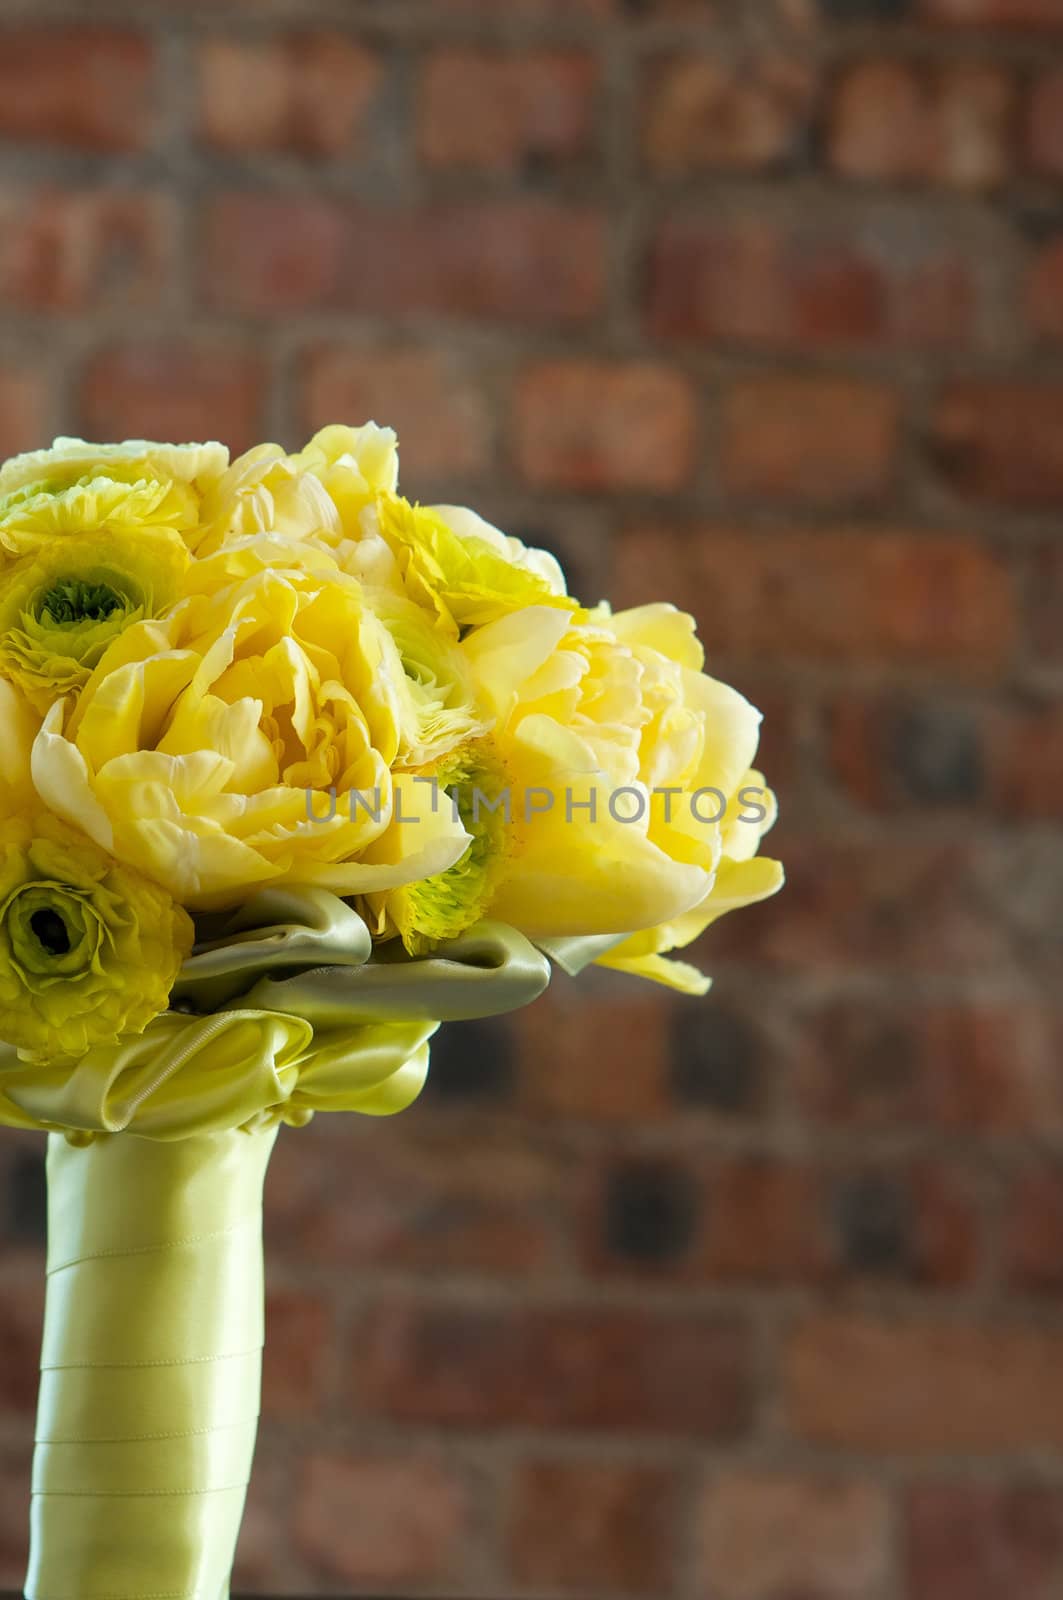 A colorful yellow bridal bouquet of flowers